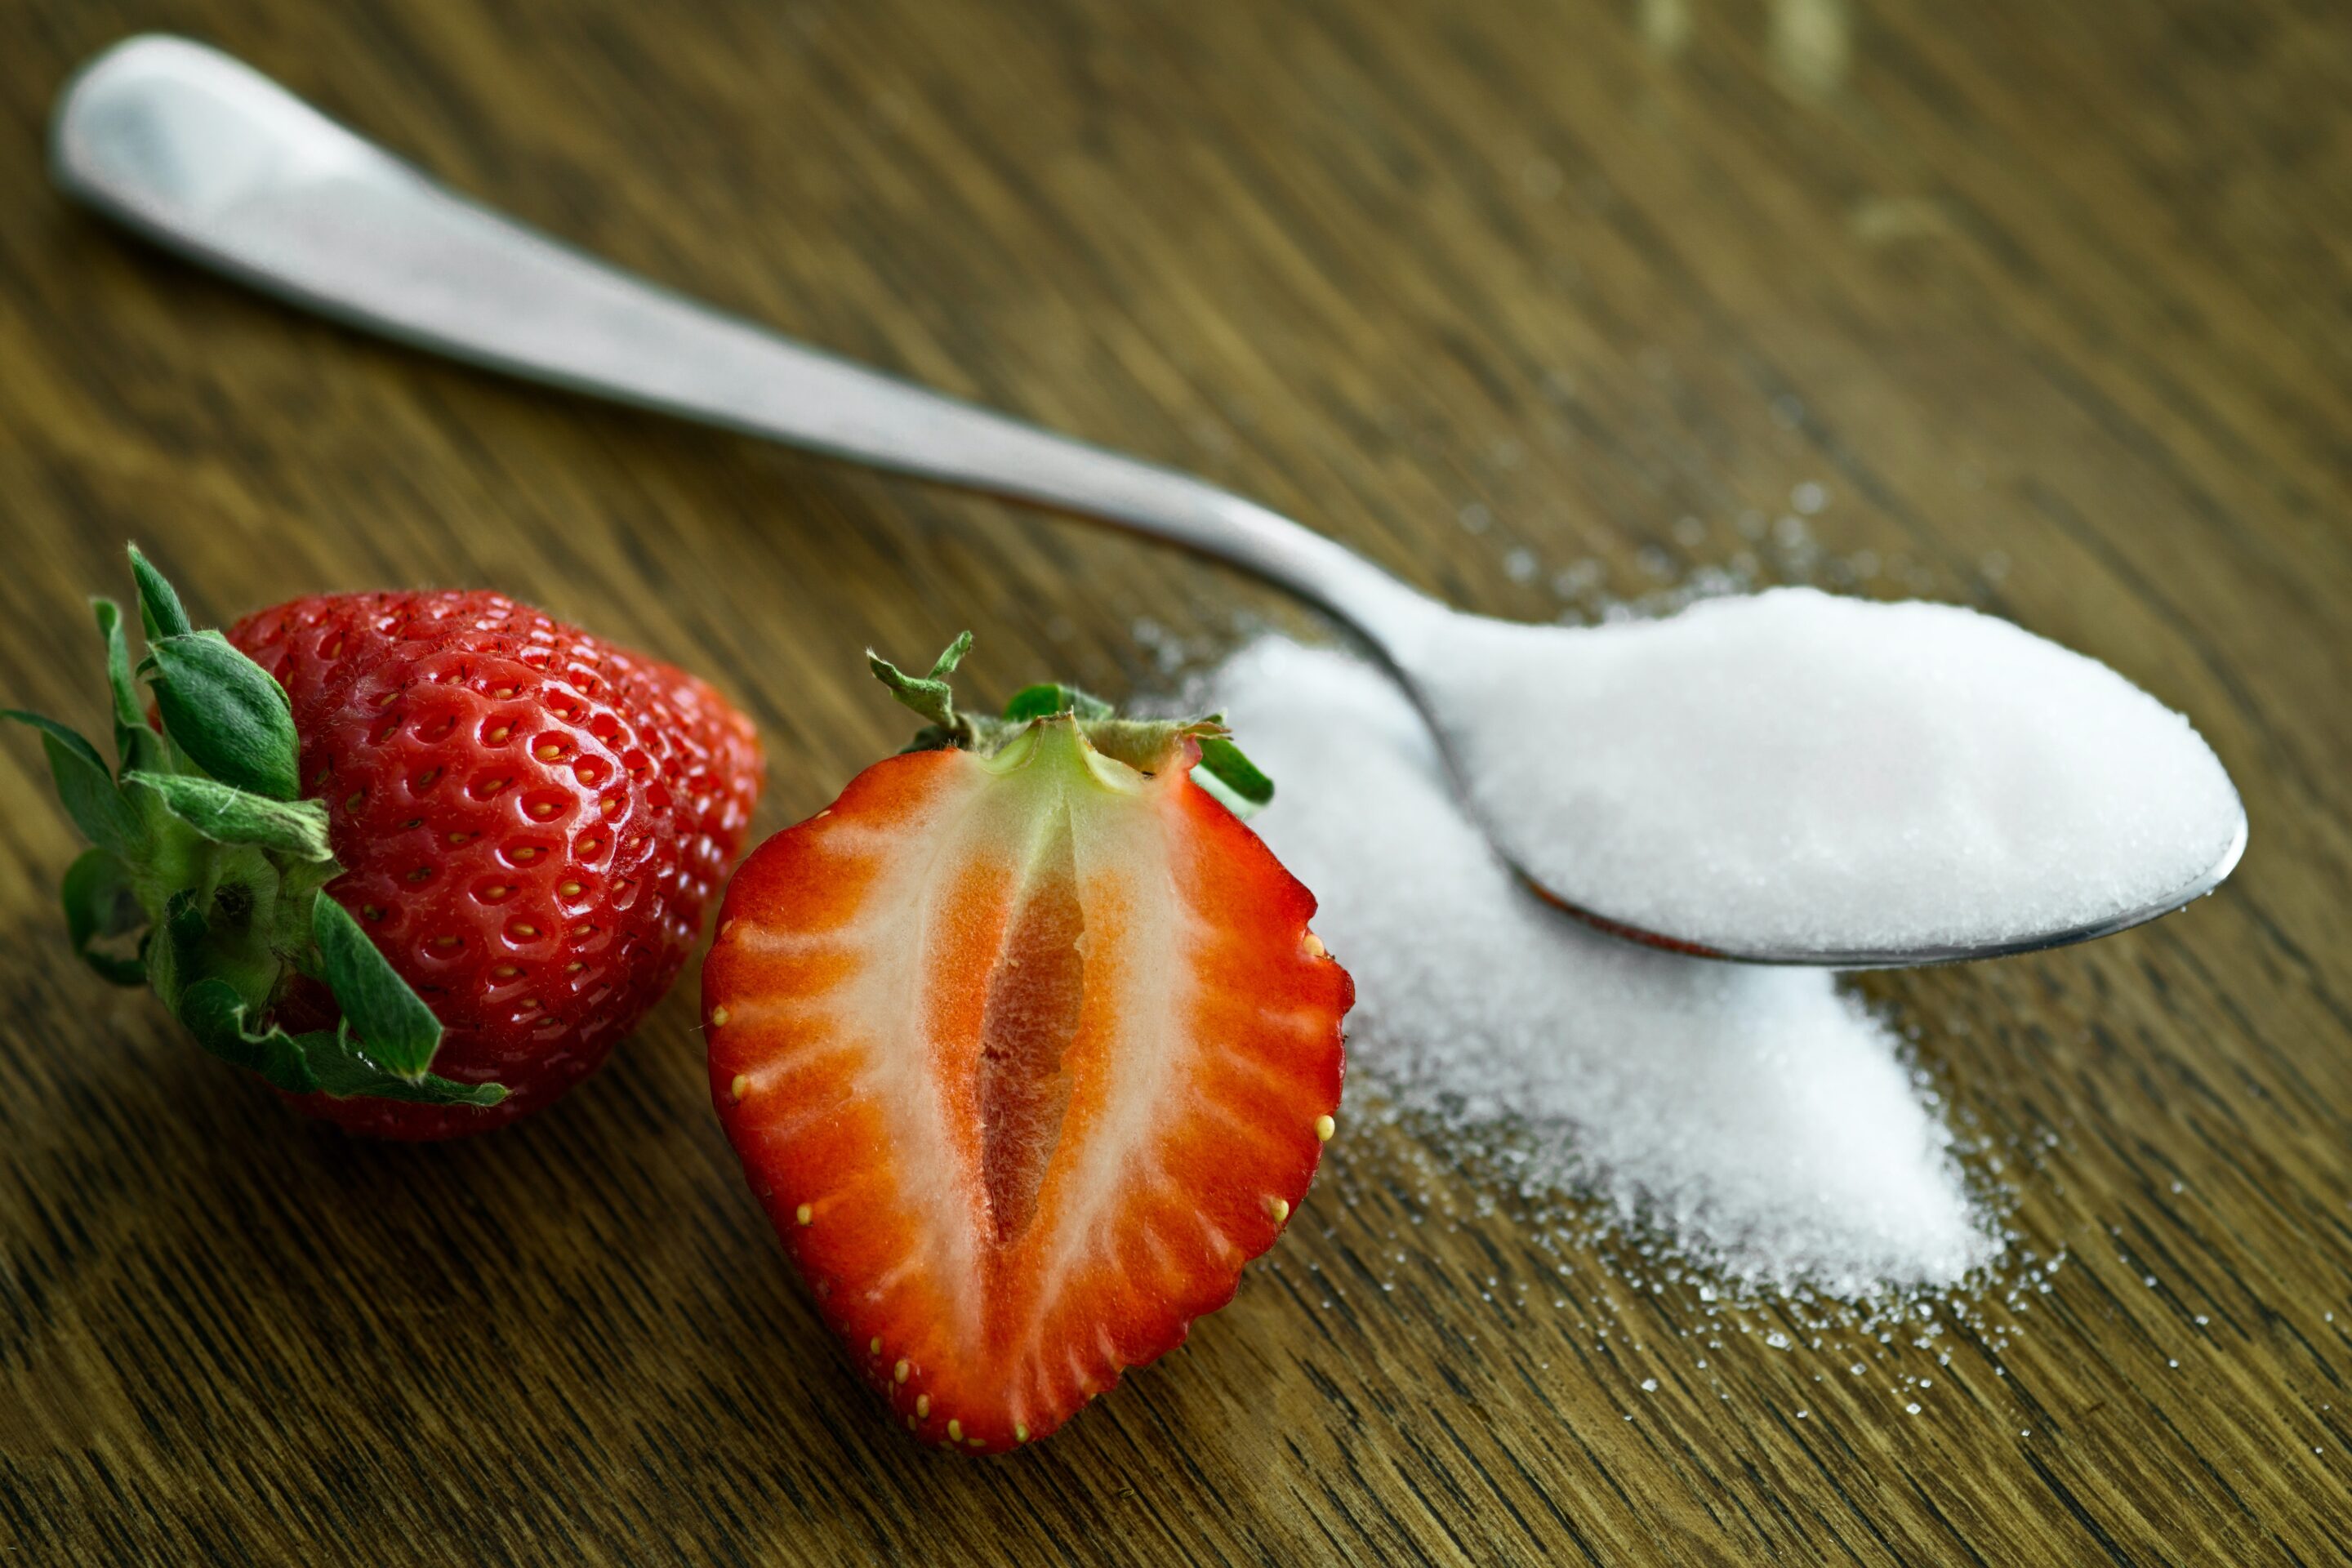 Artificial Sweeteners- Are They Safe?